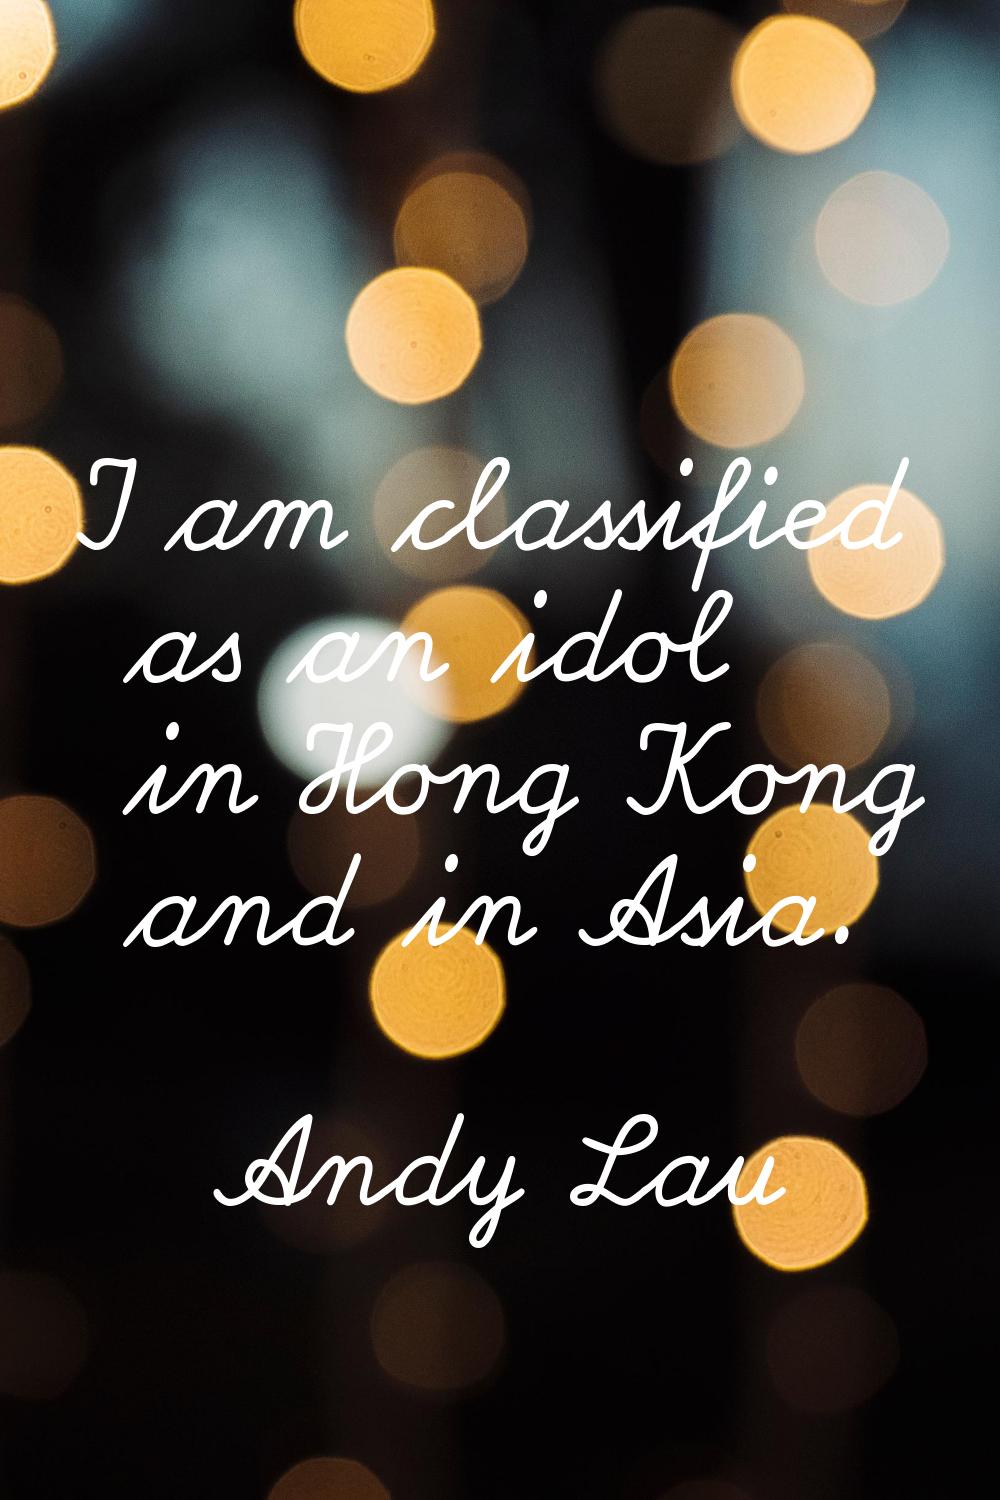 I am classified as an idol in Hong Kong and in Asia.